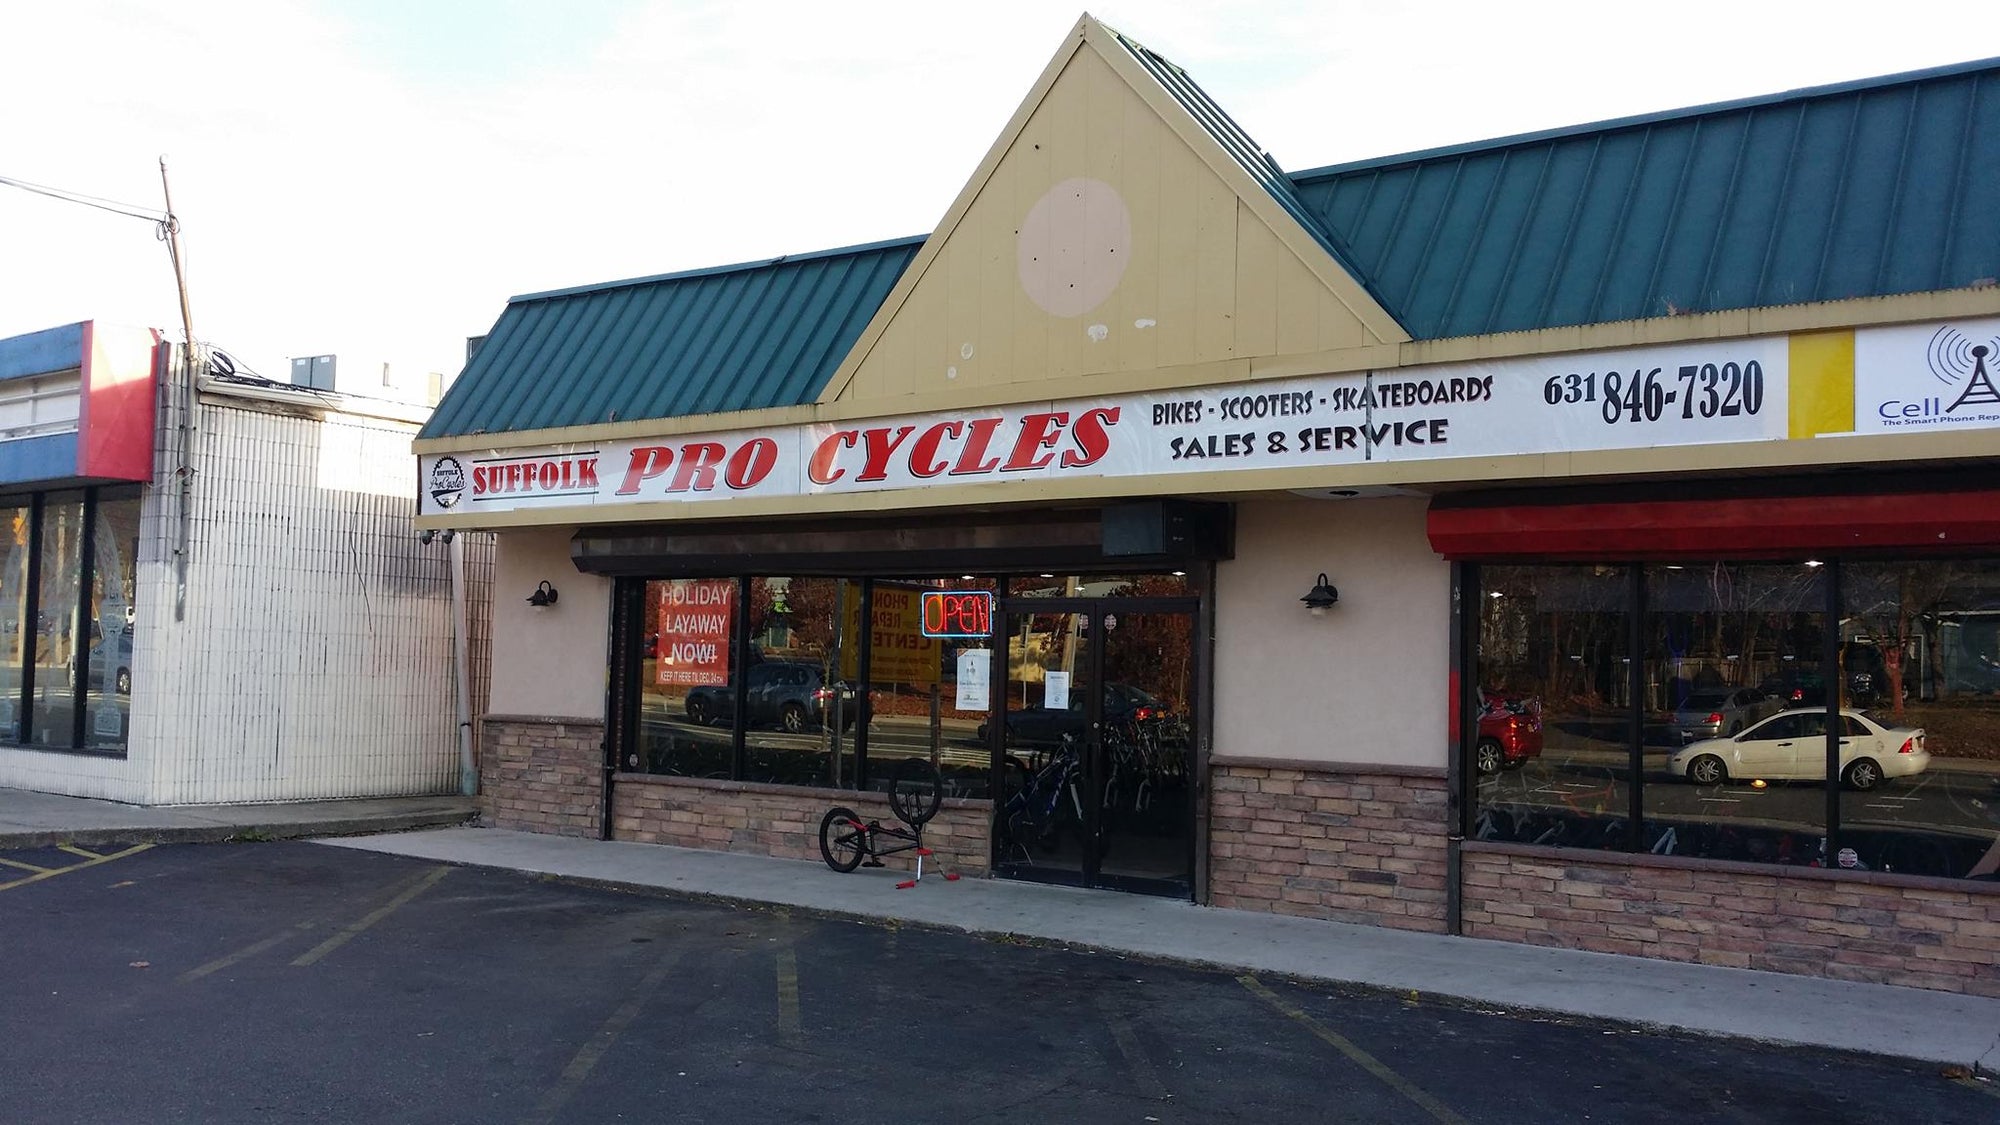 Suffolk Pro Cycles storefront photo